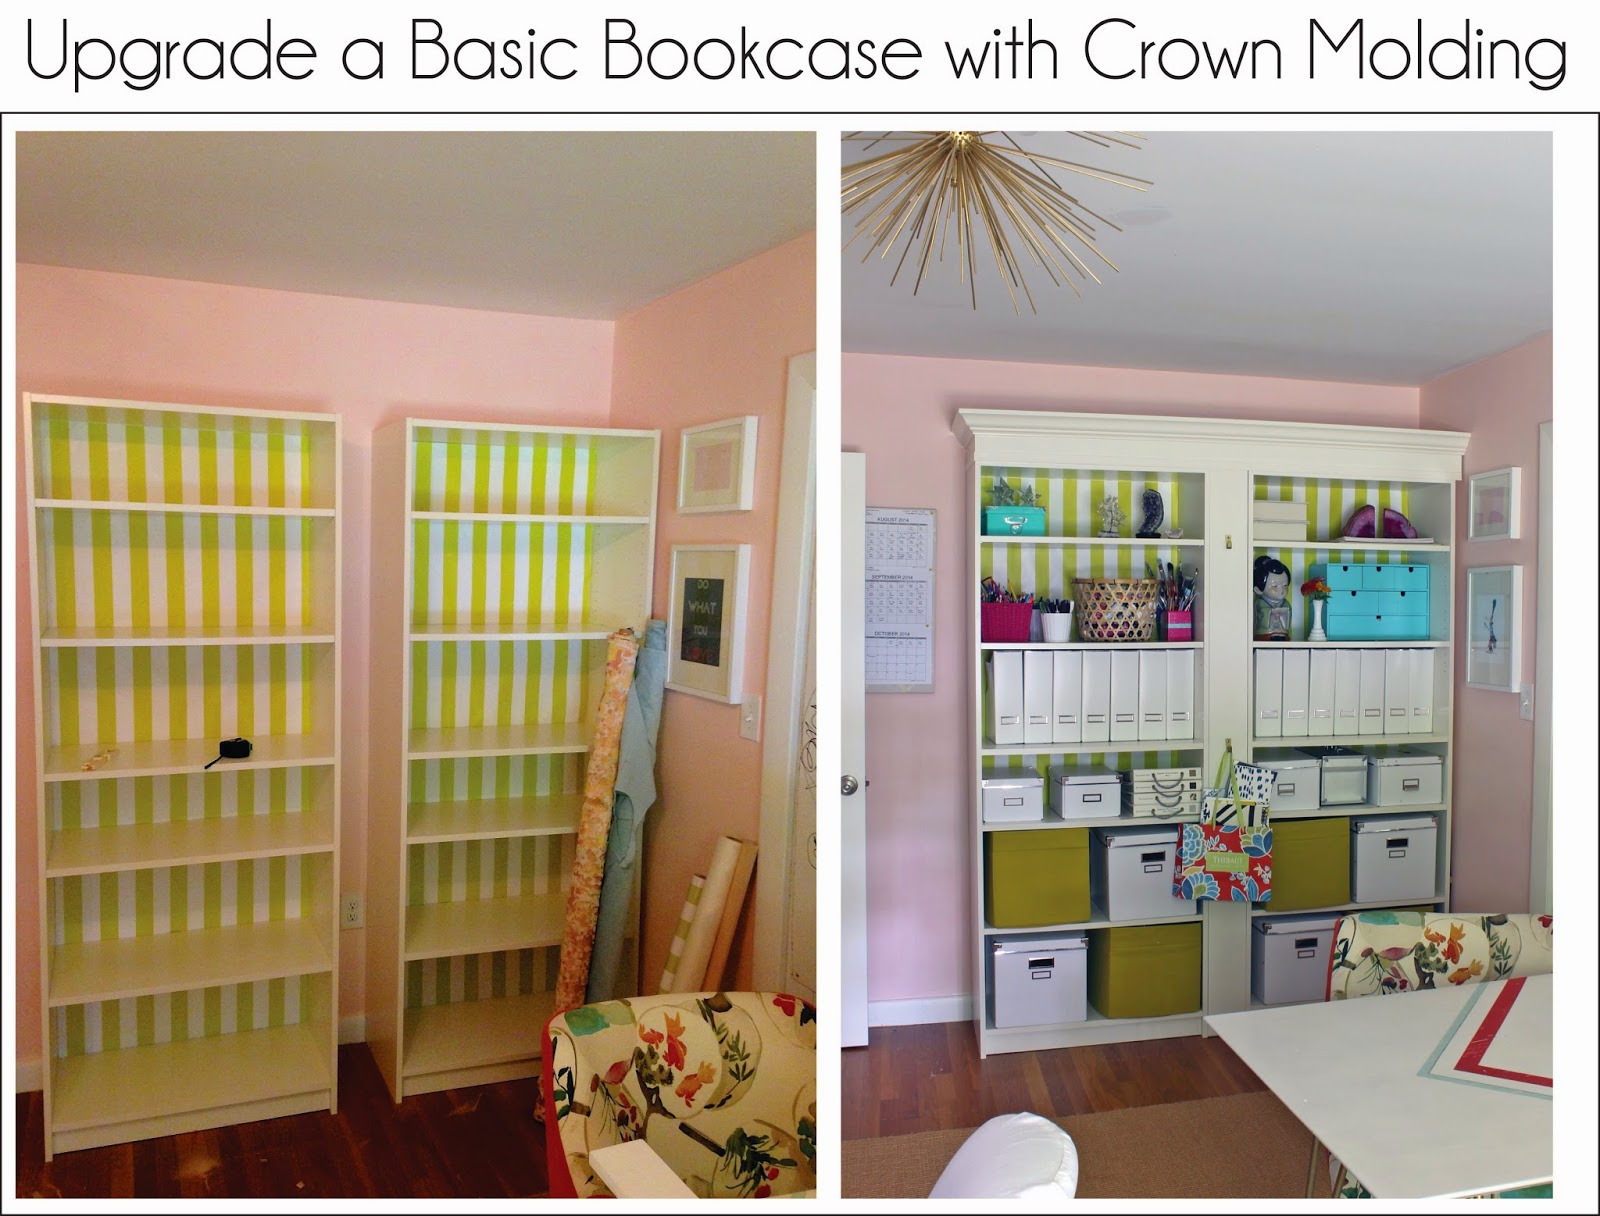 GORGEOUS SHINY THINGS: How To: Upgrade a Bookcase with Crown Molding